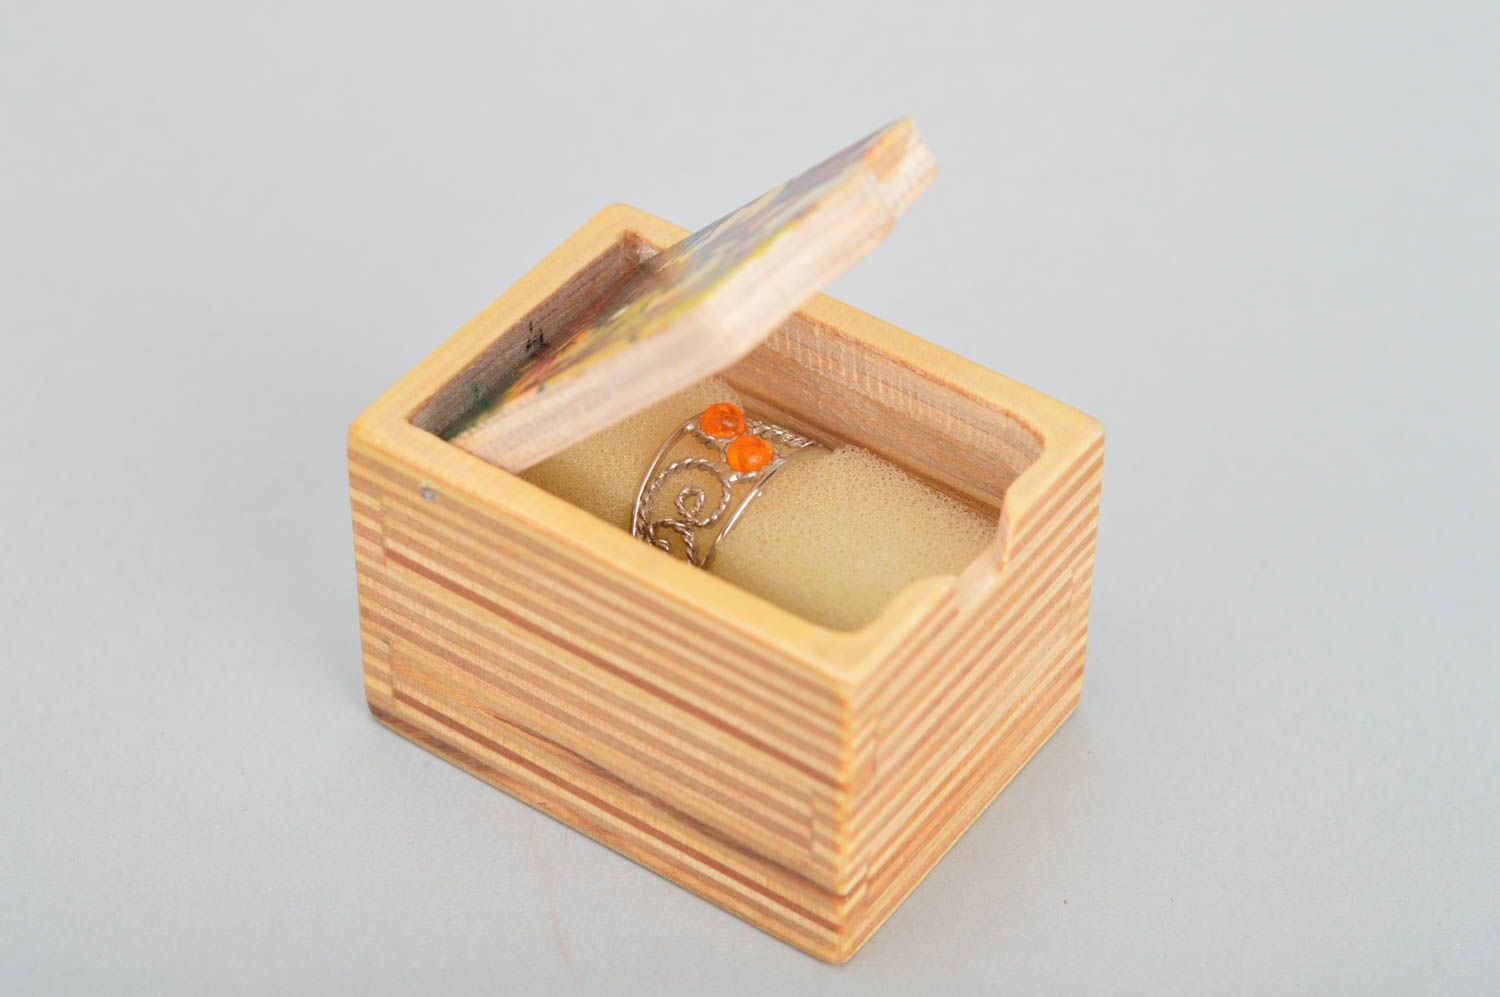 Small jewelry box made of plywood and painted handmade home decor ideas photo 2